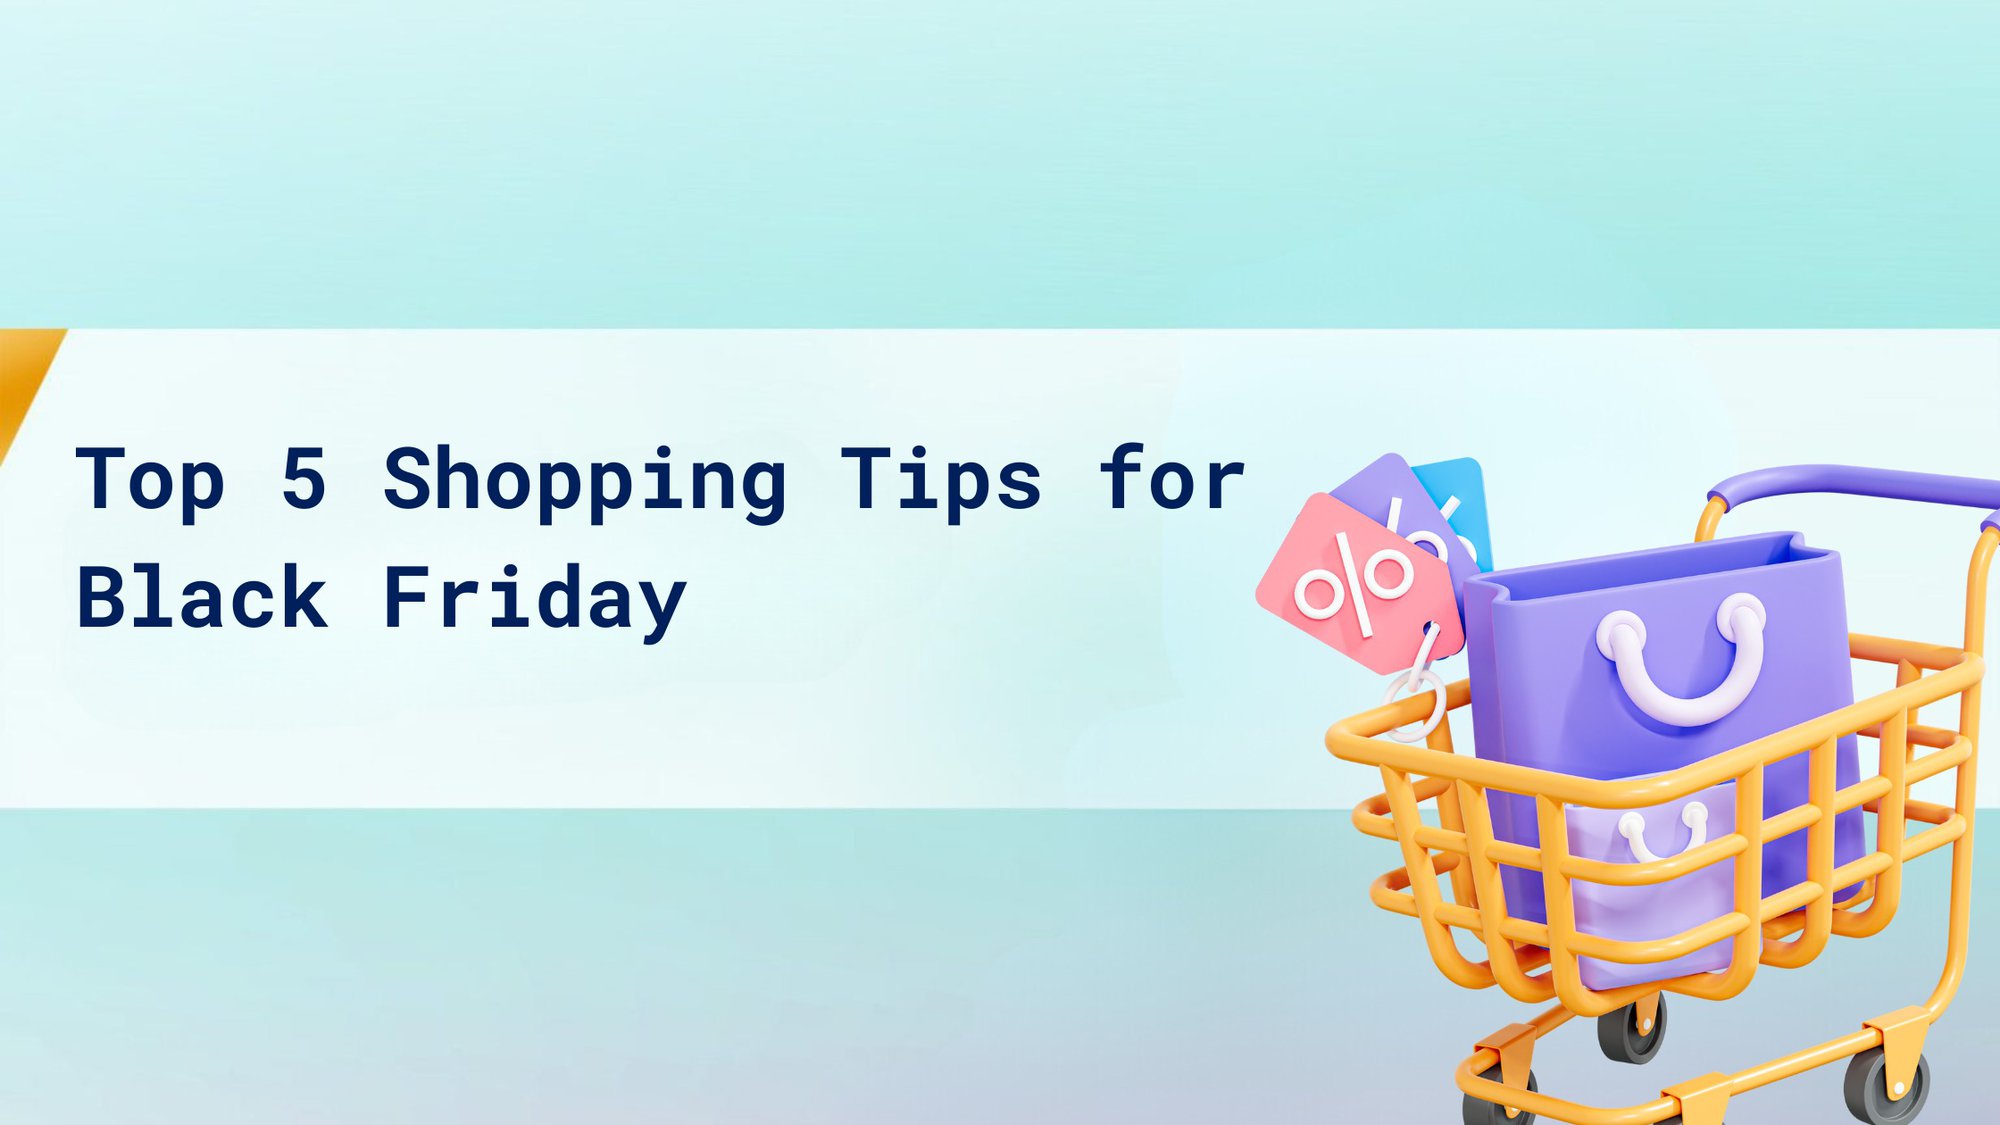 Top 5 Shopping Tips for Black Friday cover